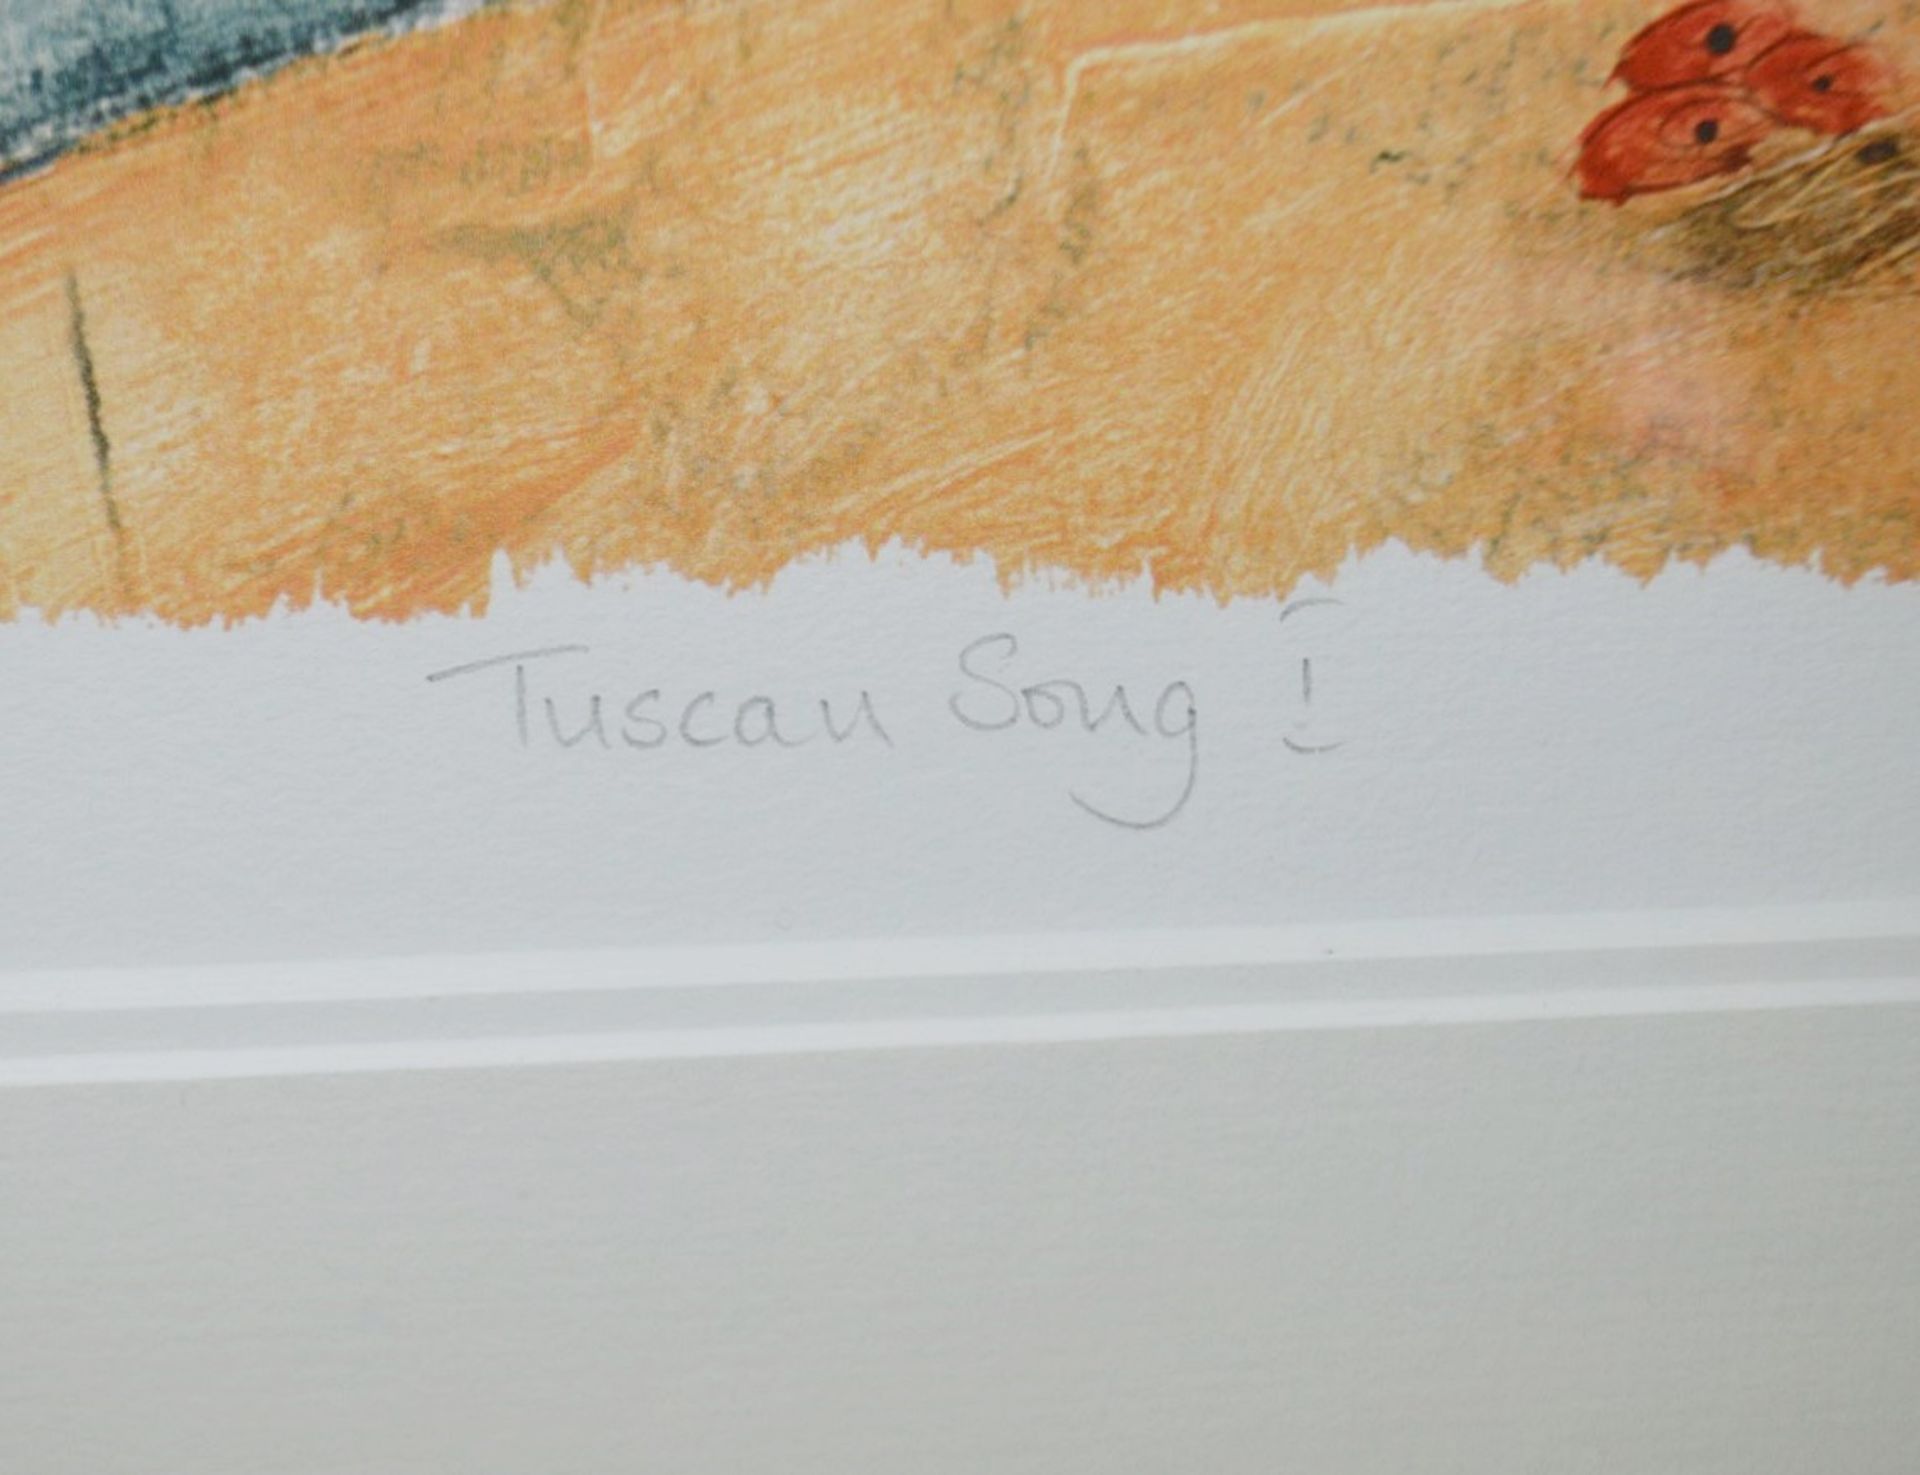 1 x Framed Limited Edition Art Print  'Tuscan Song I' By RICHARD PARGETER - Signed And Mounted - - Image 3 of 10